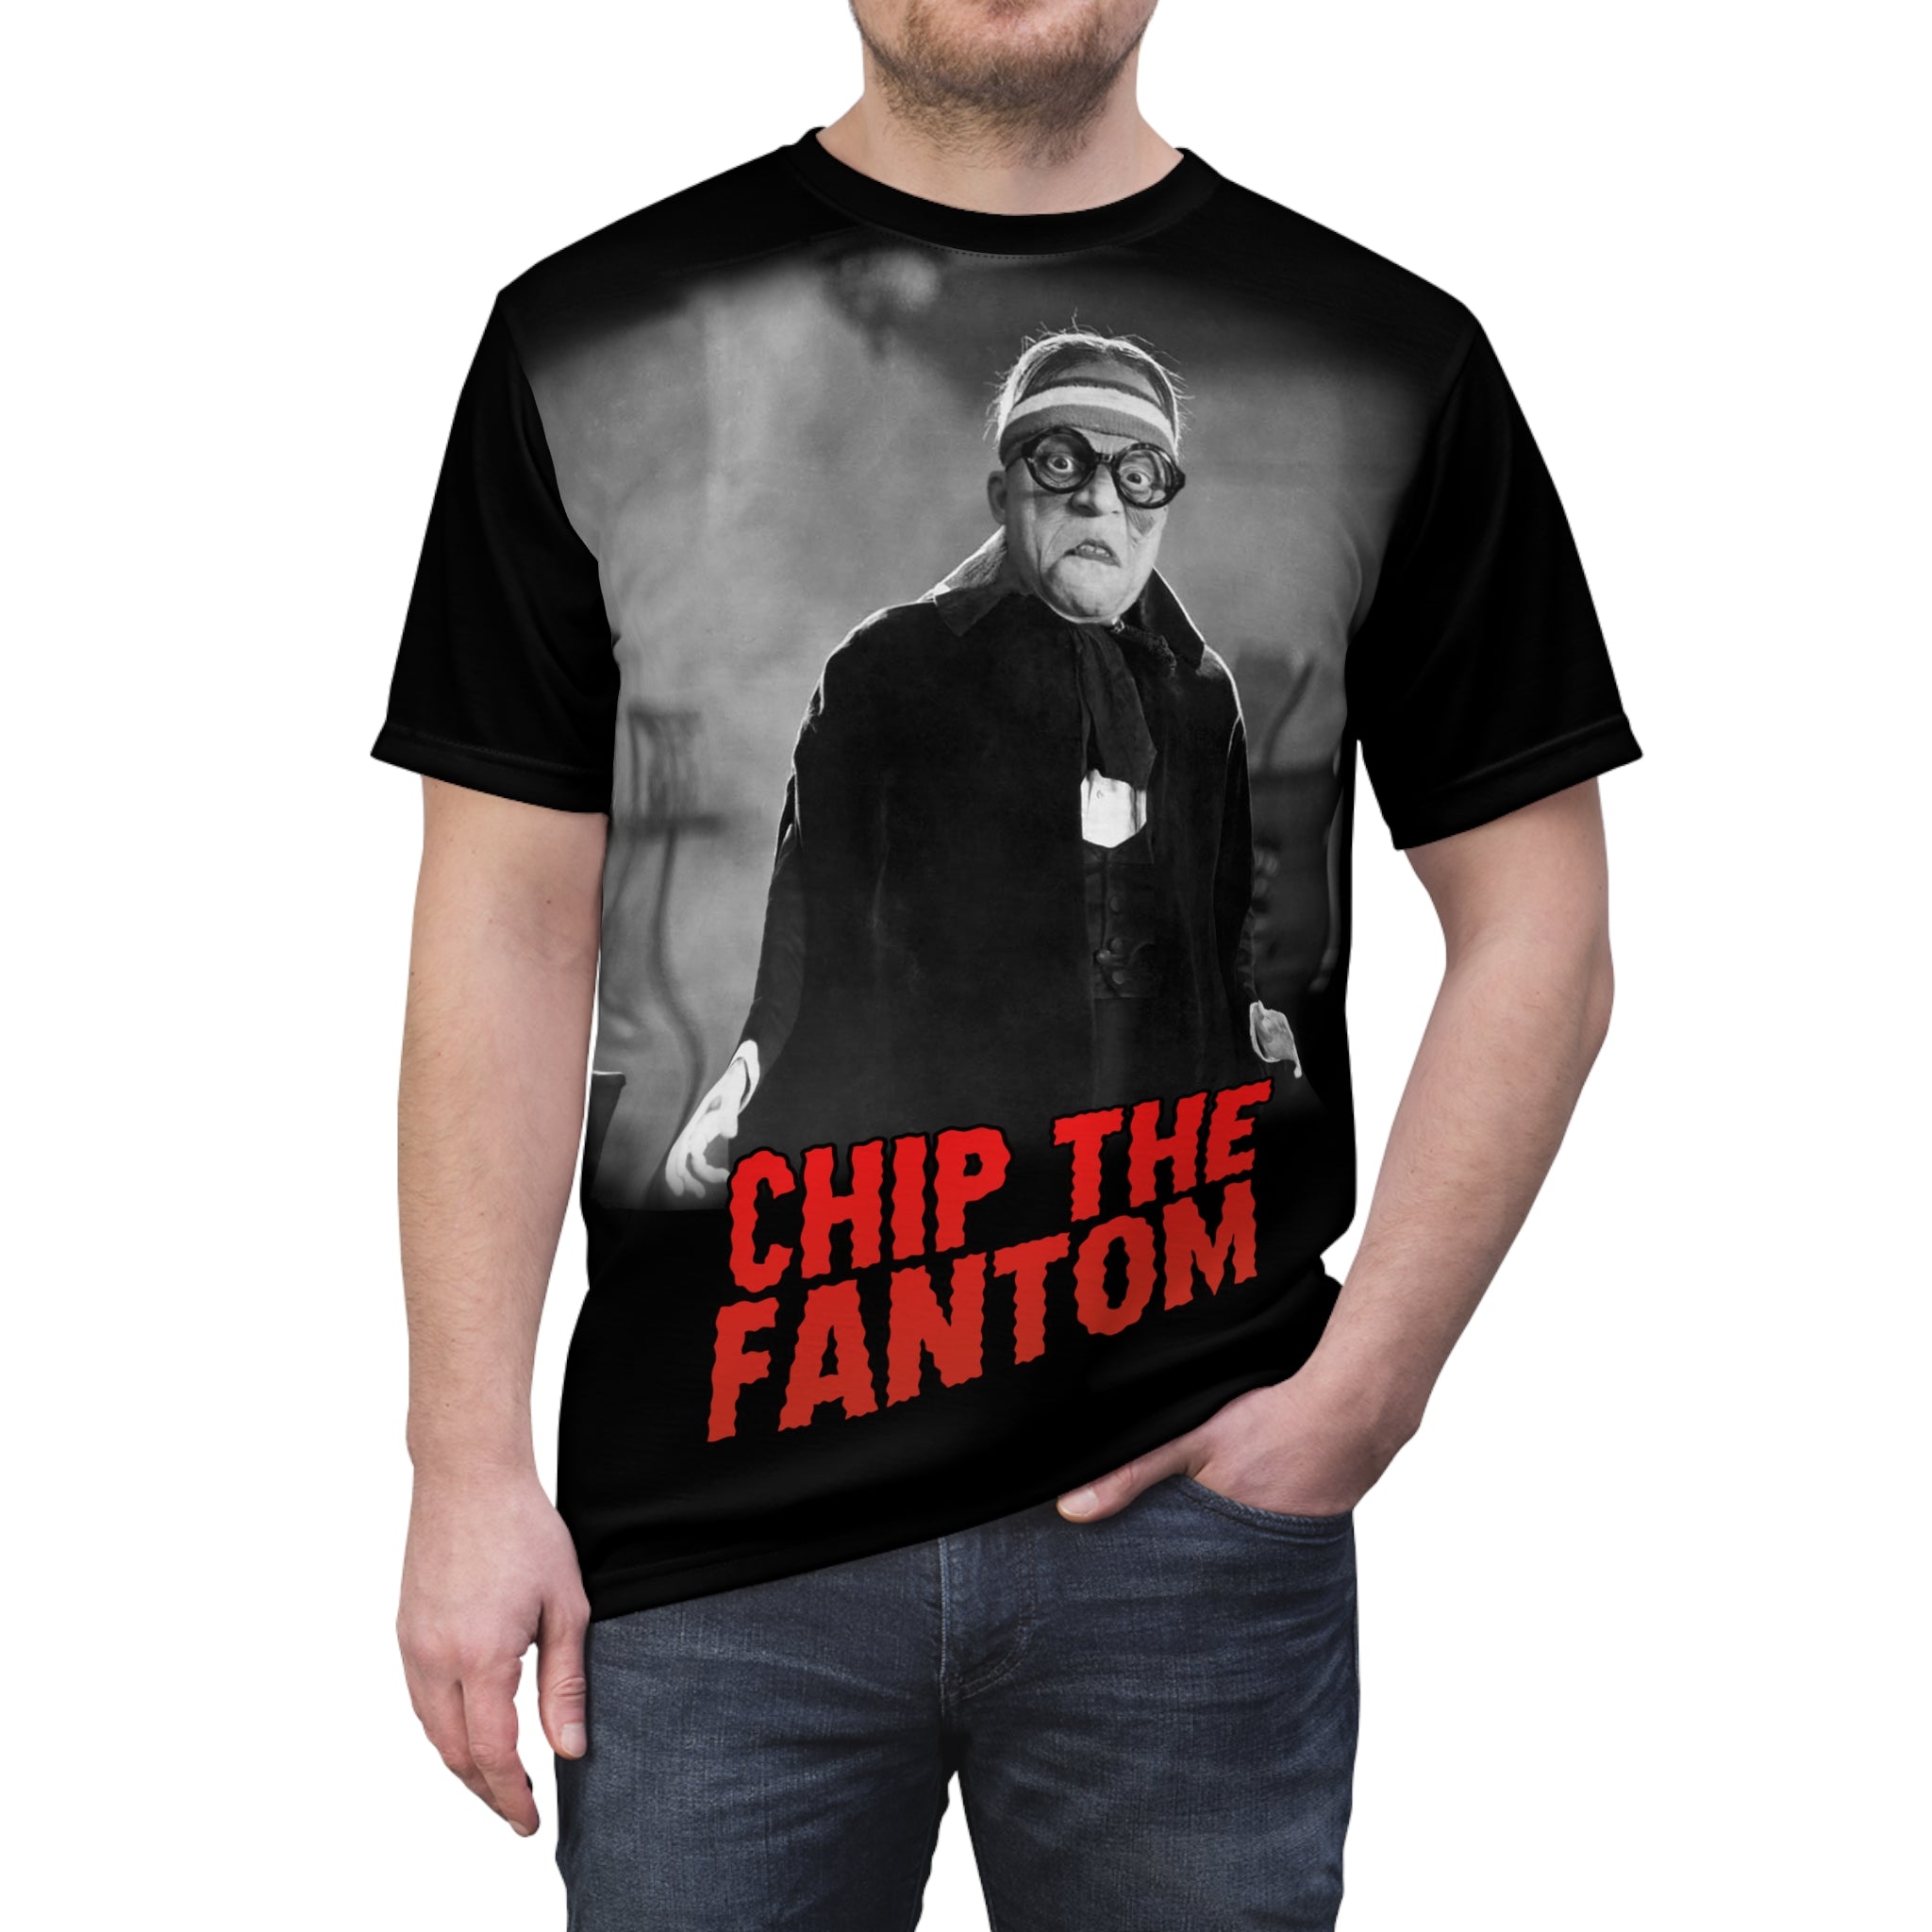 Chip the Fantom - RED EDITION - All Over Print Shirt